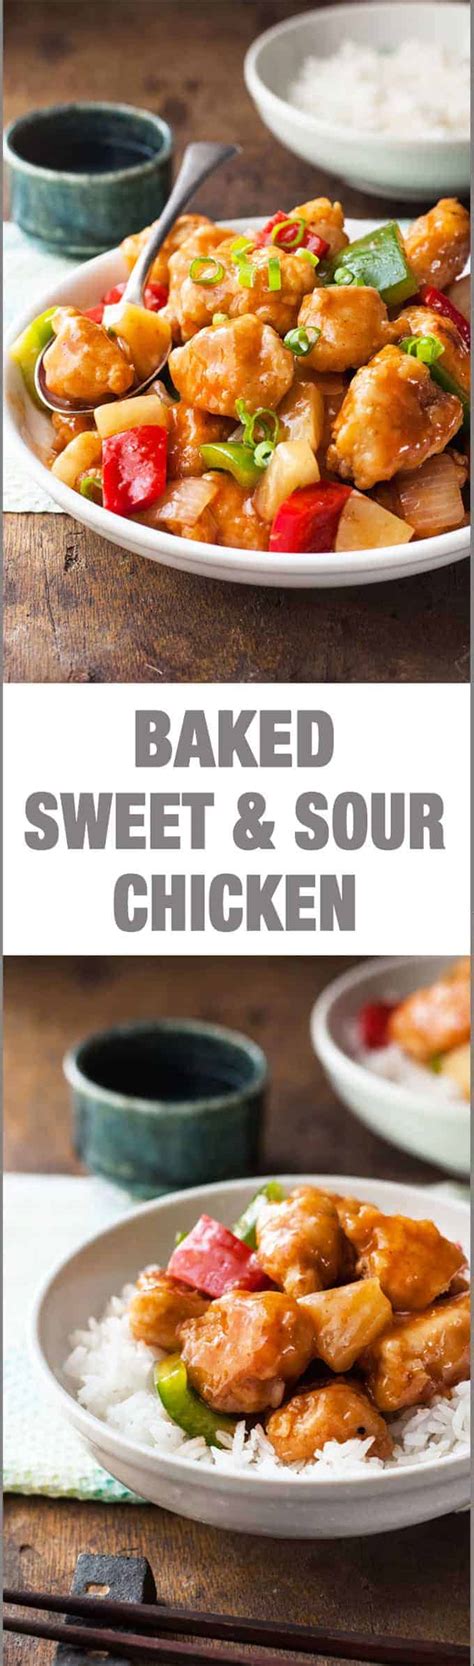 Sumac chicken and rice recipe. Oven Baked Sweet & Sour Chicken | RecipeTin Eats